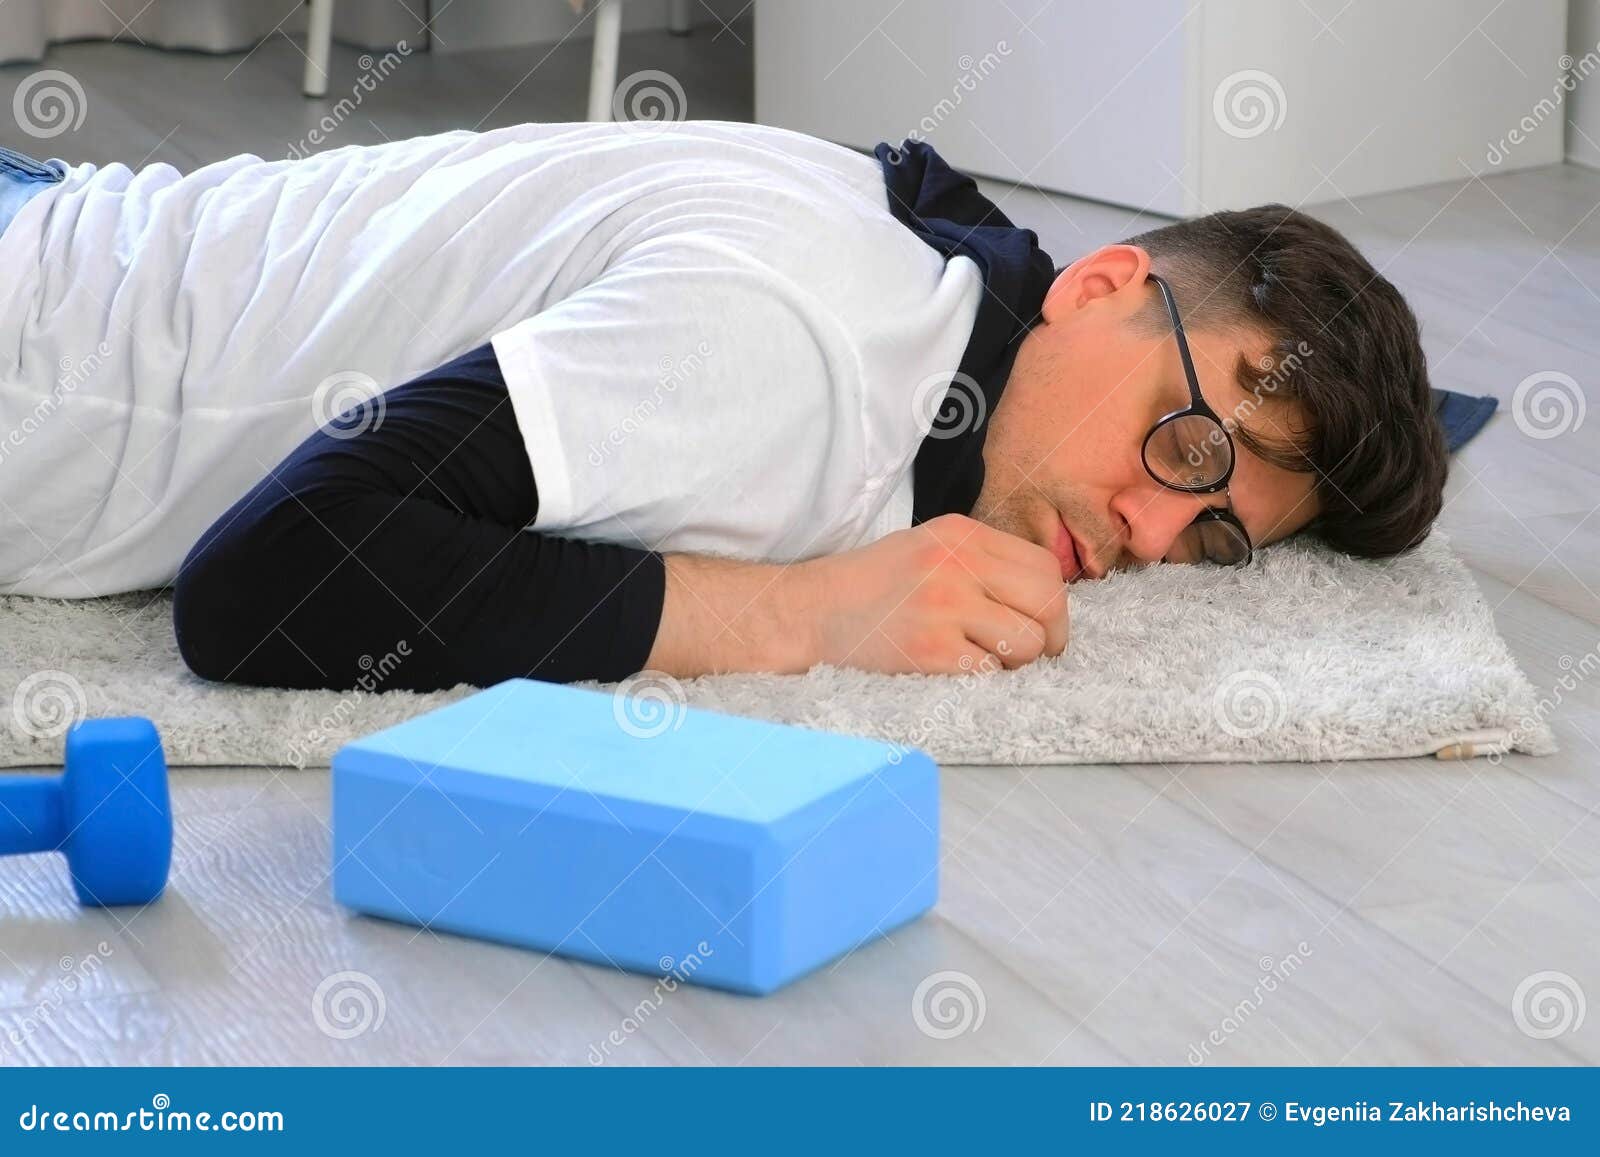 Funny Nerd Man in Glasses is Falling on Carpet and Sleeping on Floor at  Home. Stock Image - Image of nerd, block: 218626027